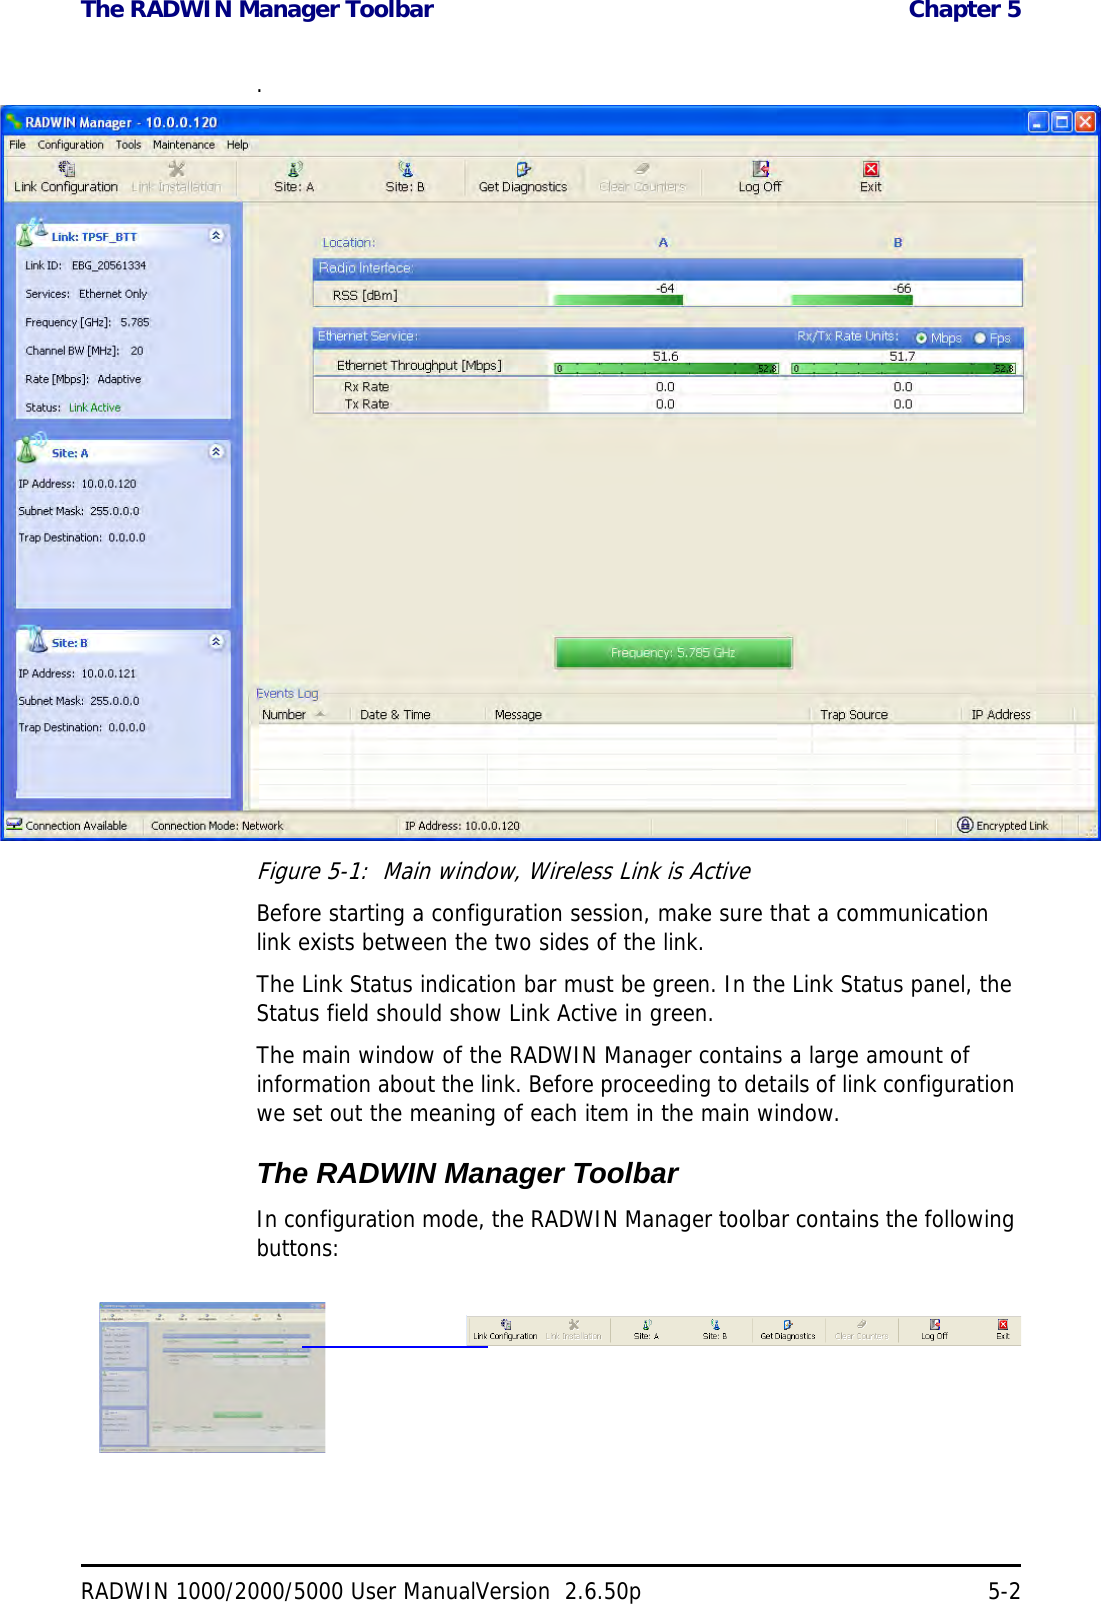 The RADWIN Manager Toolbar  Chapter 5RADWIN 1000/2000/5000 User ManualVersion  2.6.50p 5-2.Figure 5-1:  Main window, Wireless Link is ActiveBefore starting a configuration session, make sure that a communication link exists between the two sides of the link.The Link Status indication bar must be green. In the Link Status panel, the Status field should show Link Active in green.The main window of the RADWIN Manager contains a large amount of information about the link. Before proceeding to details of link configuration we set out the meaning of each item in the main window.The RADWIN Manager ToolbarIn configuration mode, the RADWIN Manager toolbar contains the following buttons: